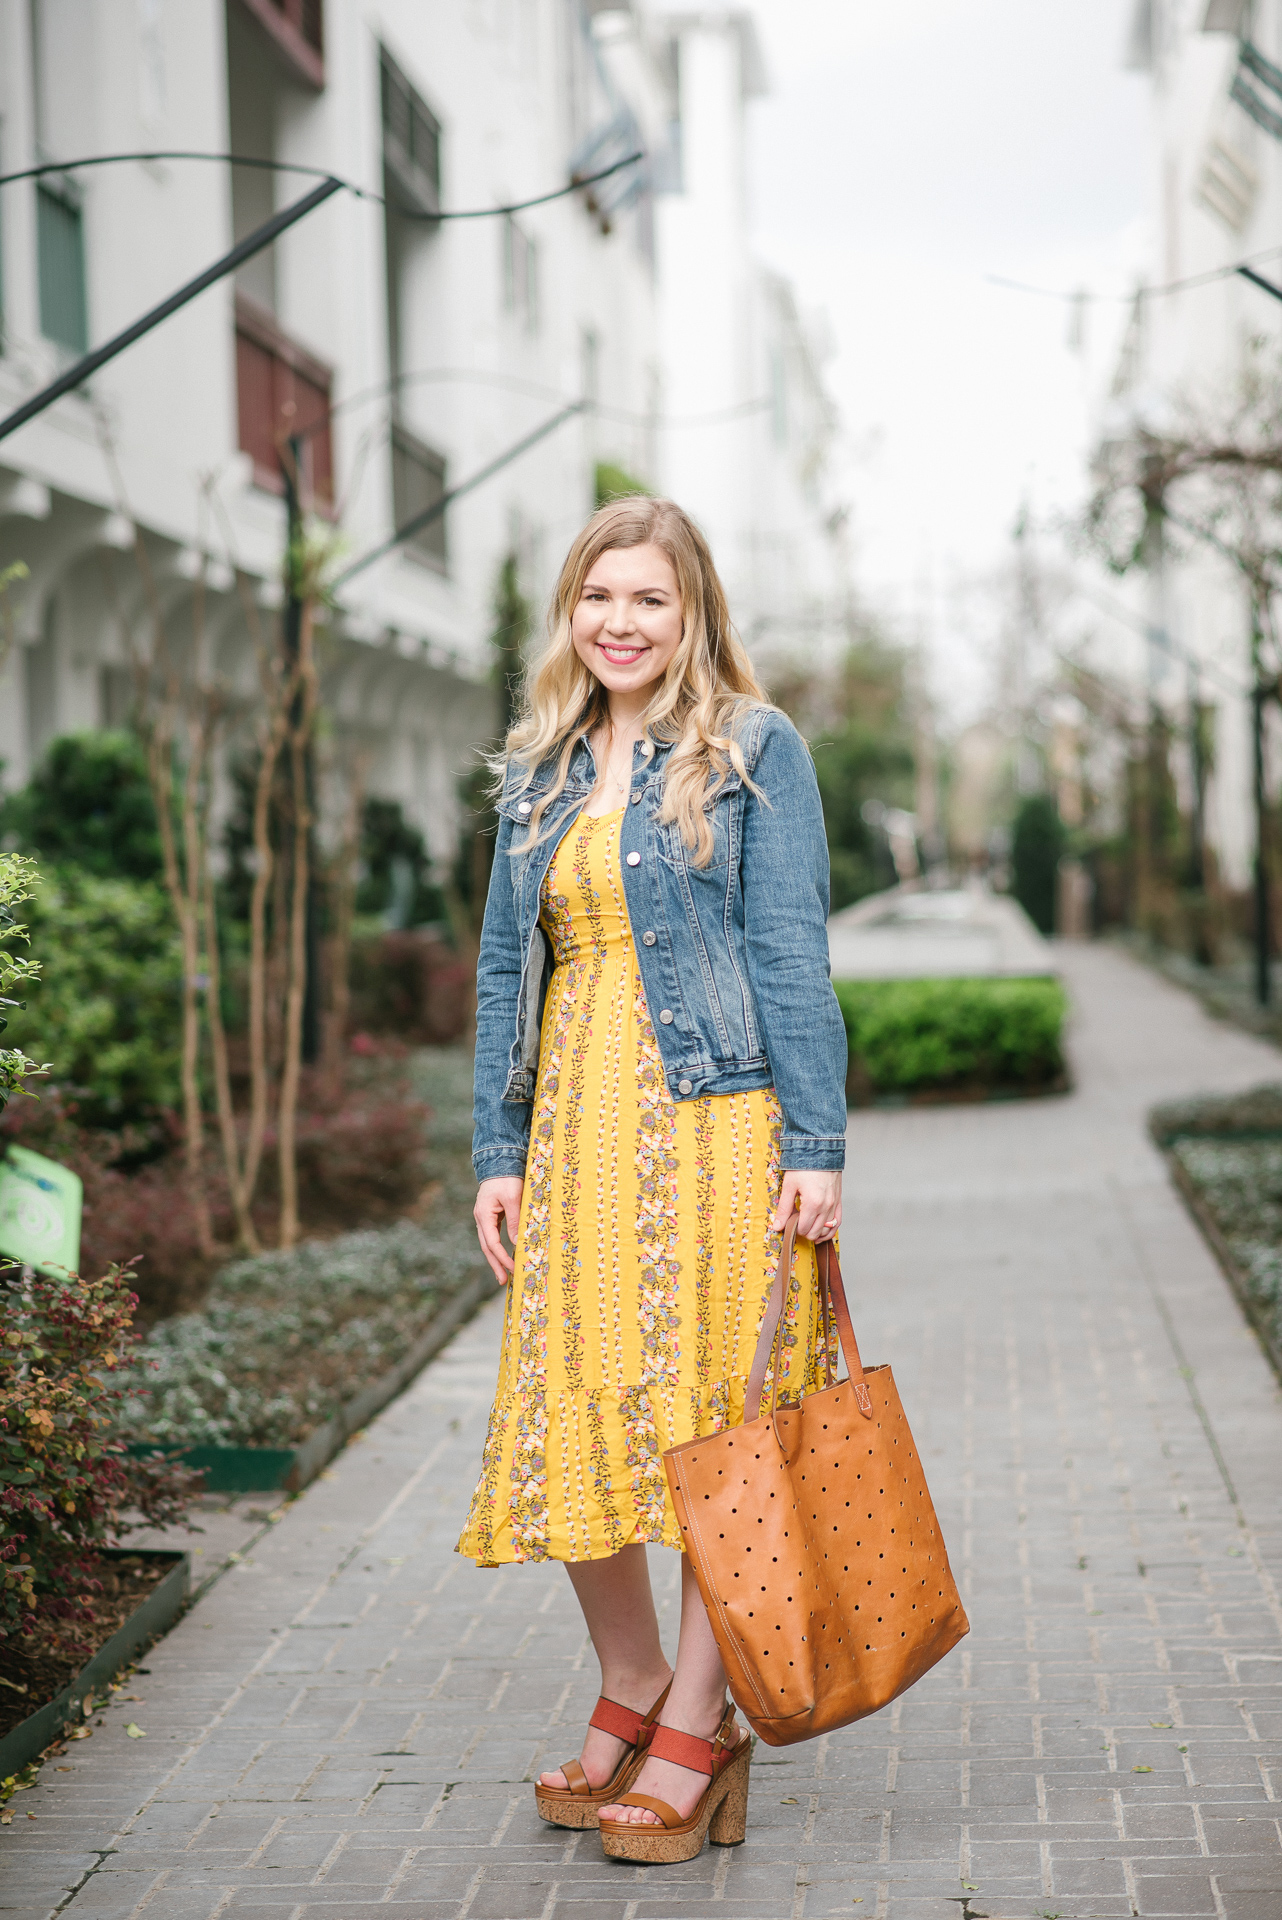 Yellow Floral Dress, Denim Jacket and Madewell Brown Leather Tote Worn By Jillian Goltzman of Cup of Charisma